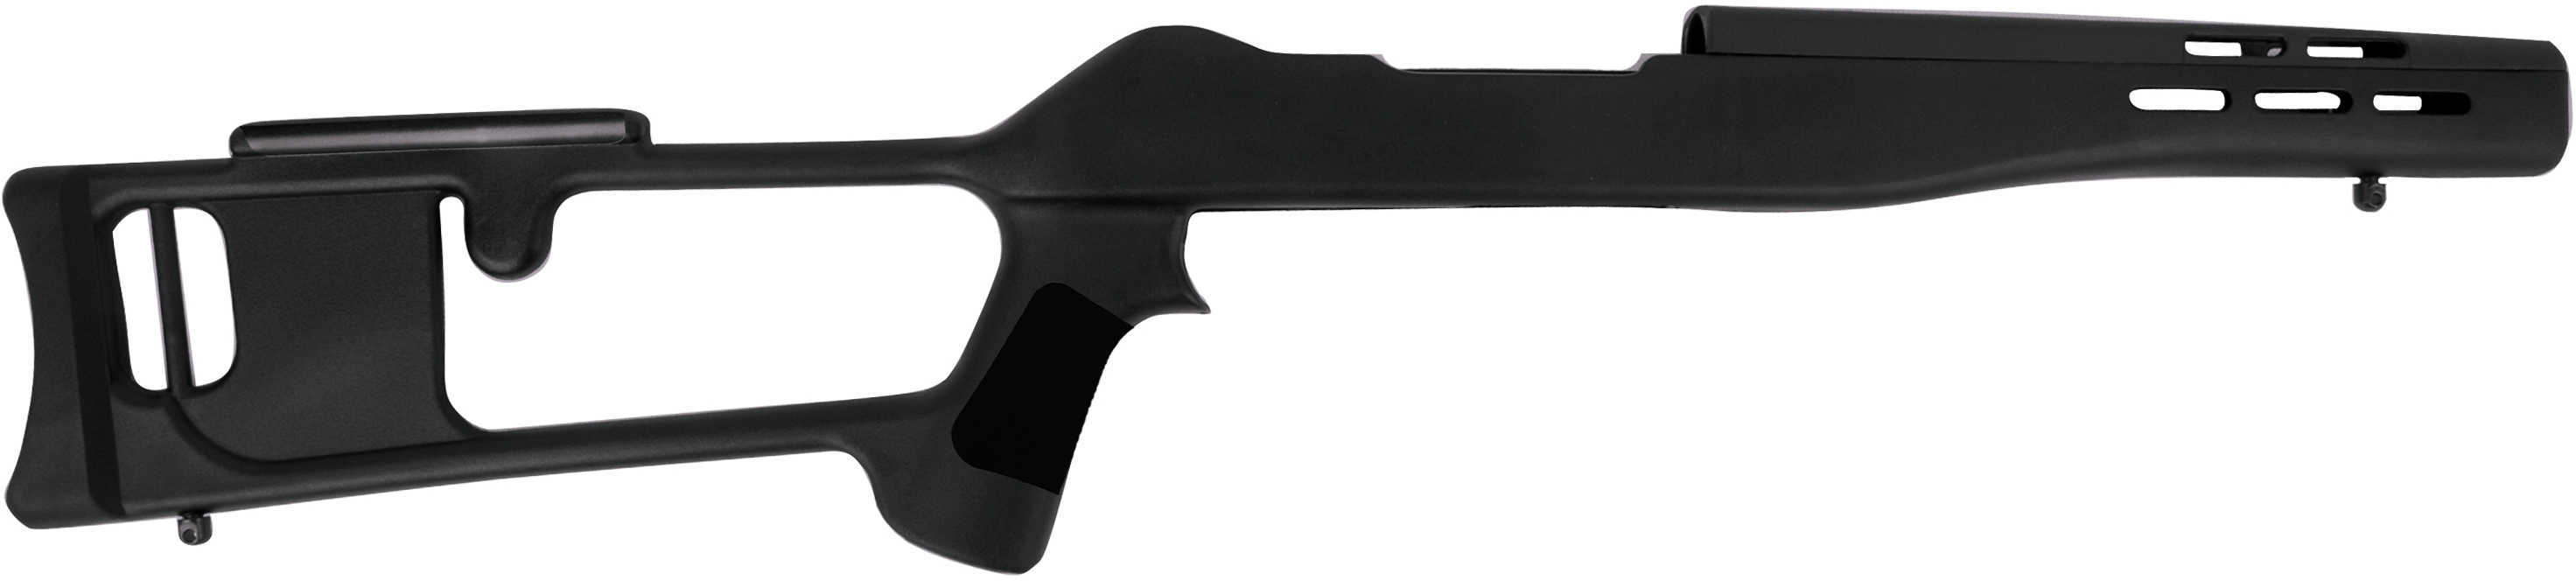 Advanced Technology Stock Fits Ruger 10/22 Glass Filled Nylon Thumbhole Black RUG3000